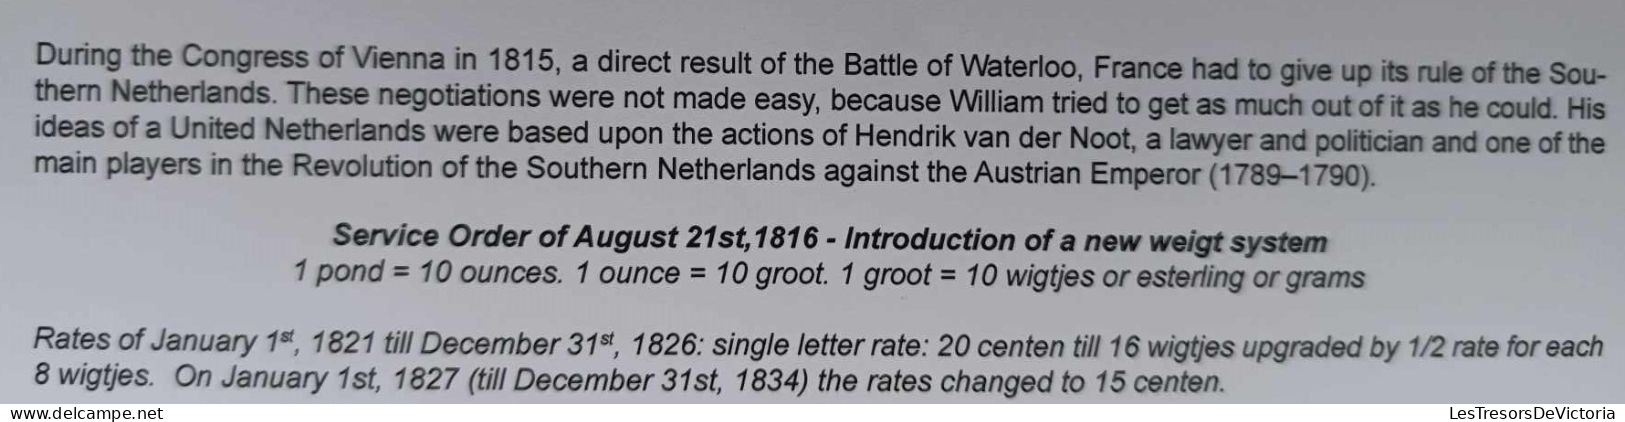 Letter mailed on october 13th 1829 from Gent to Hornu  - Weight indication "24" wigtjes